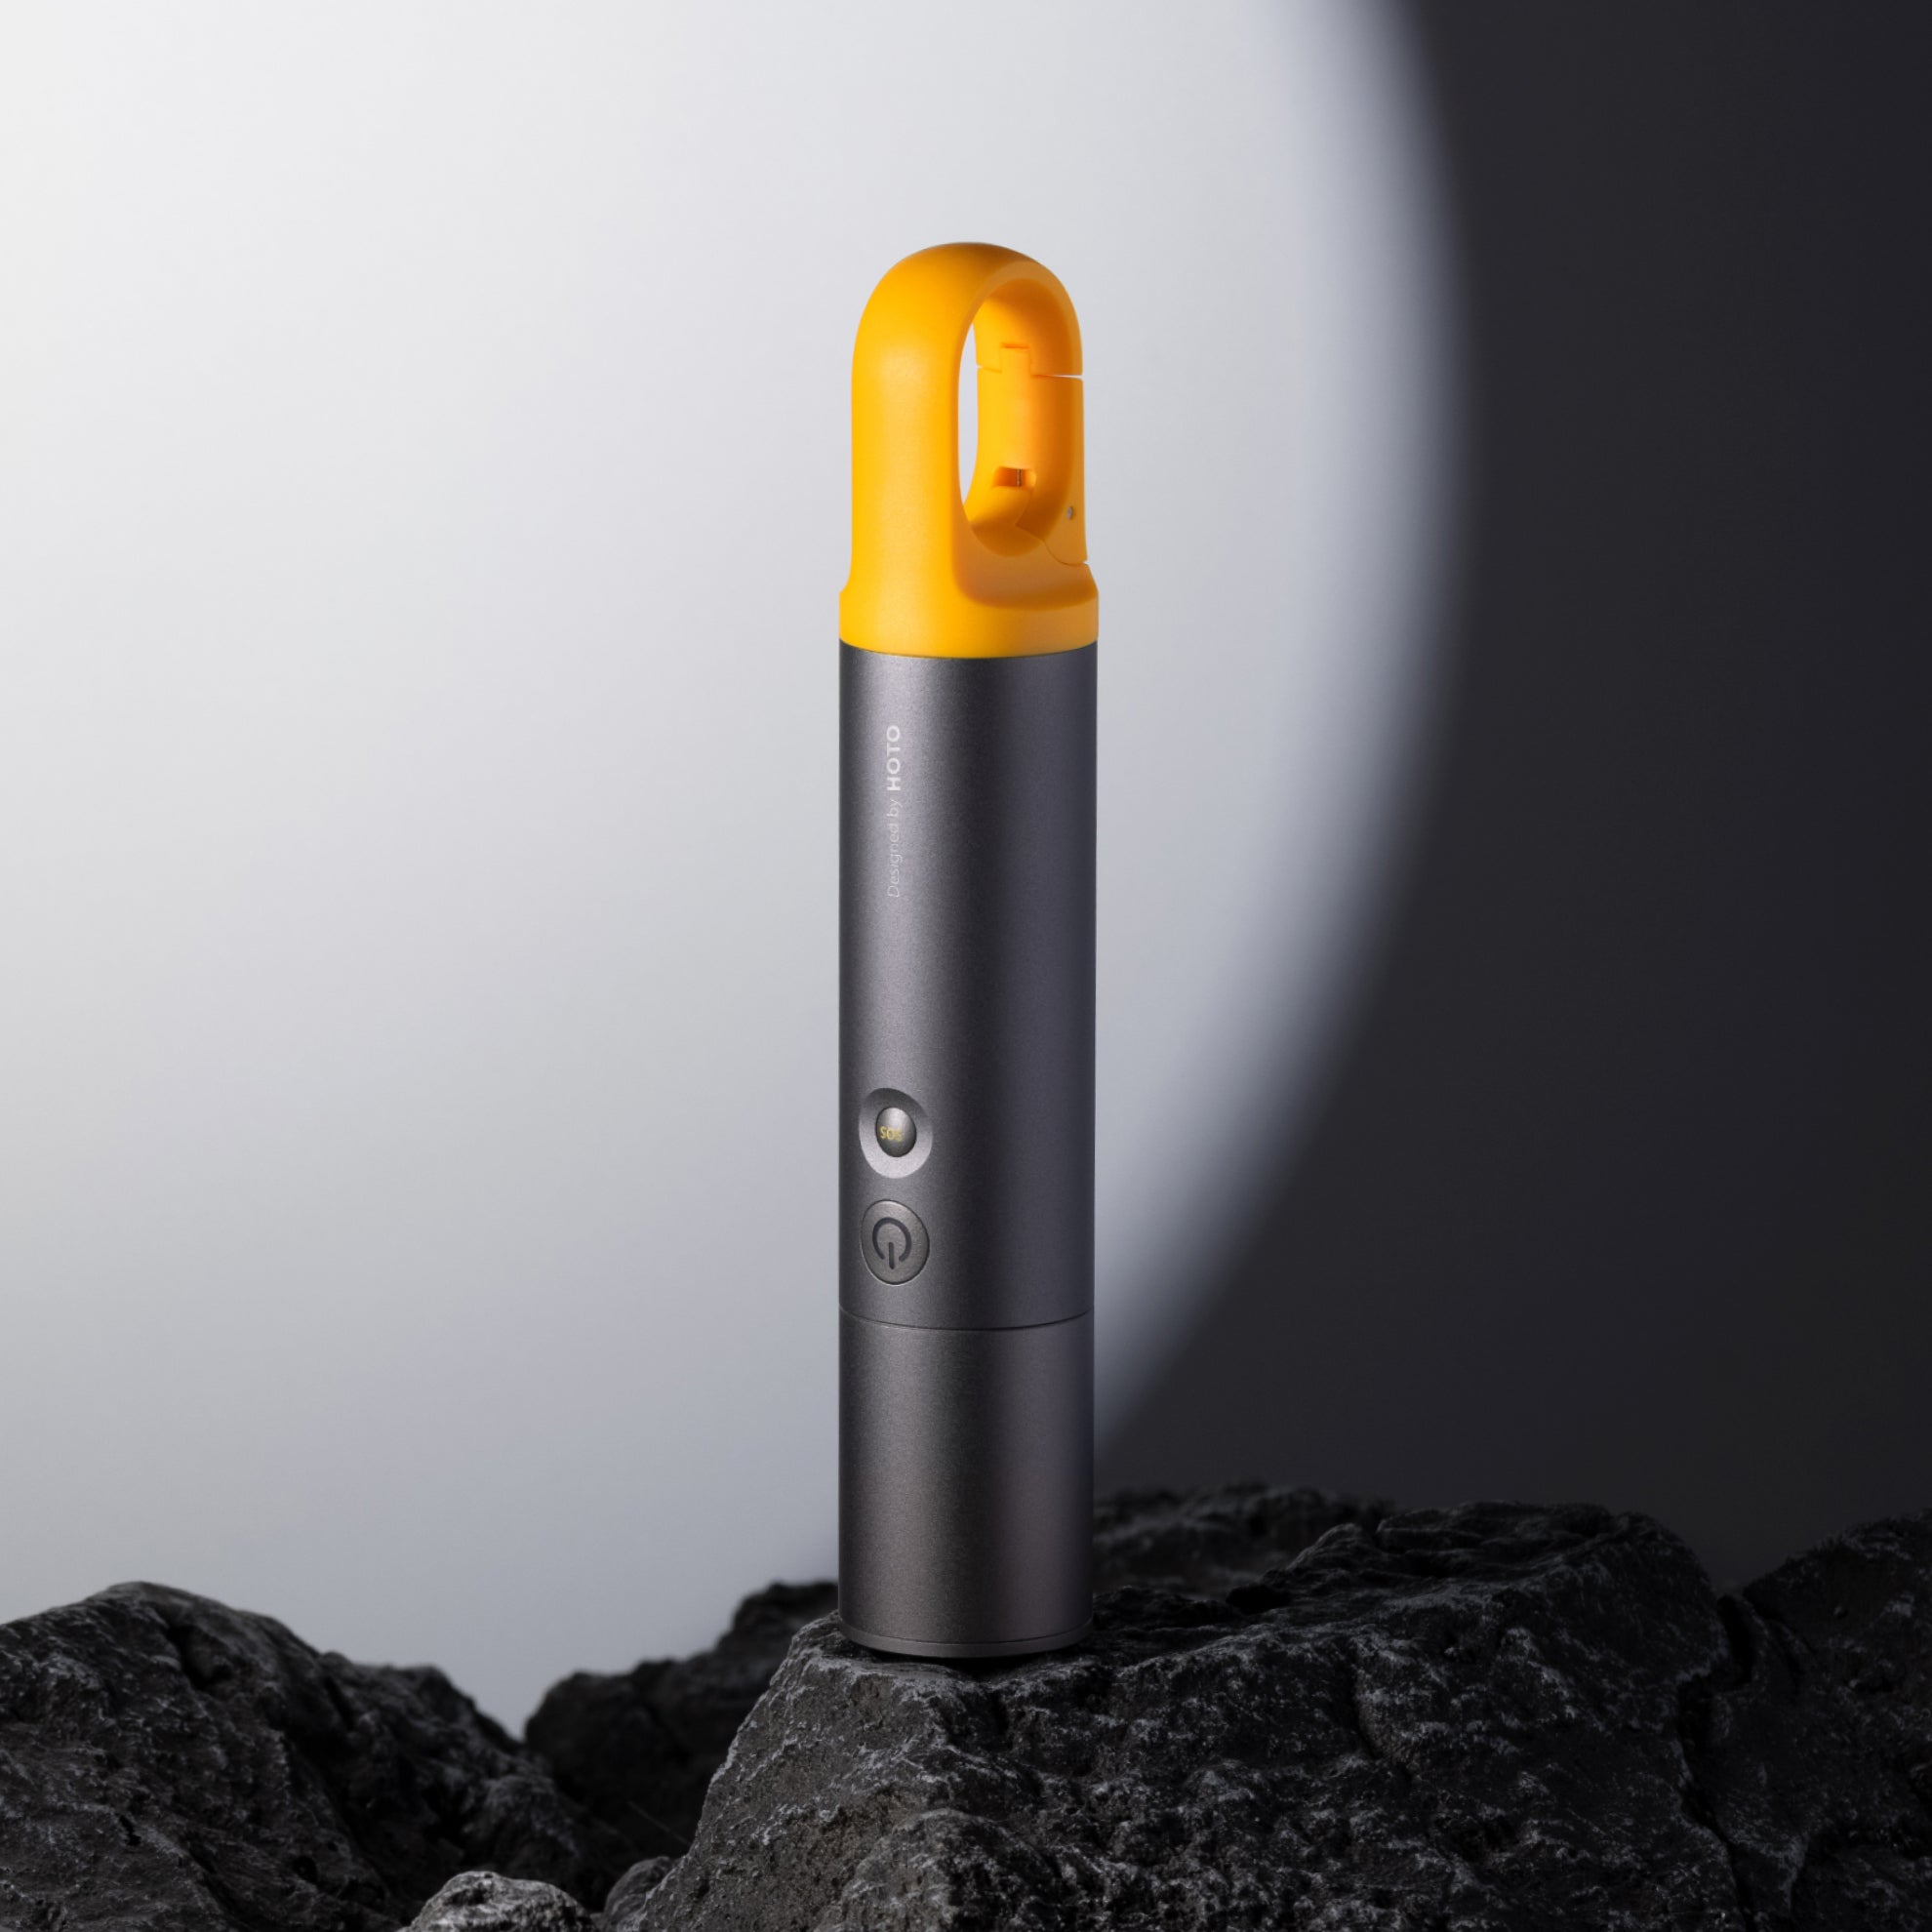 Hoto Flashlight Fit, LED Rechargeable, 280 Lumens, IP55